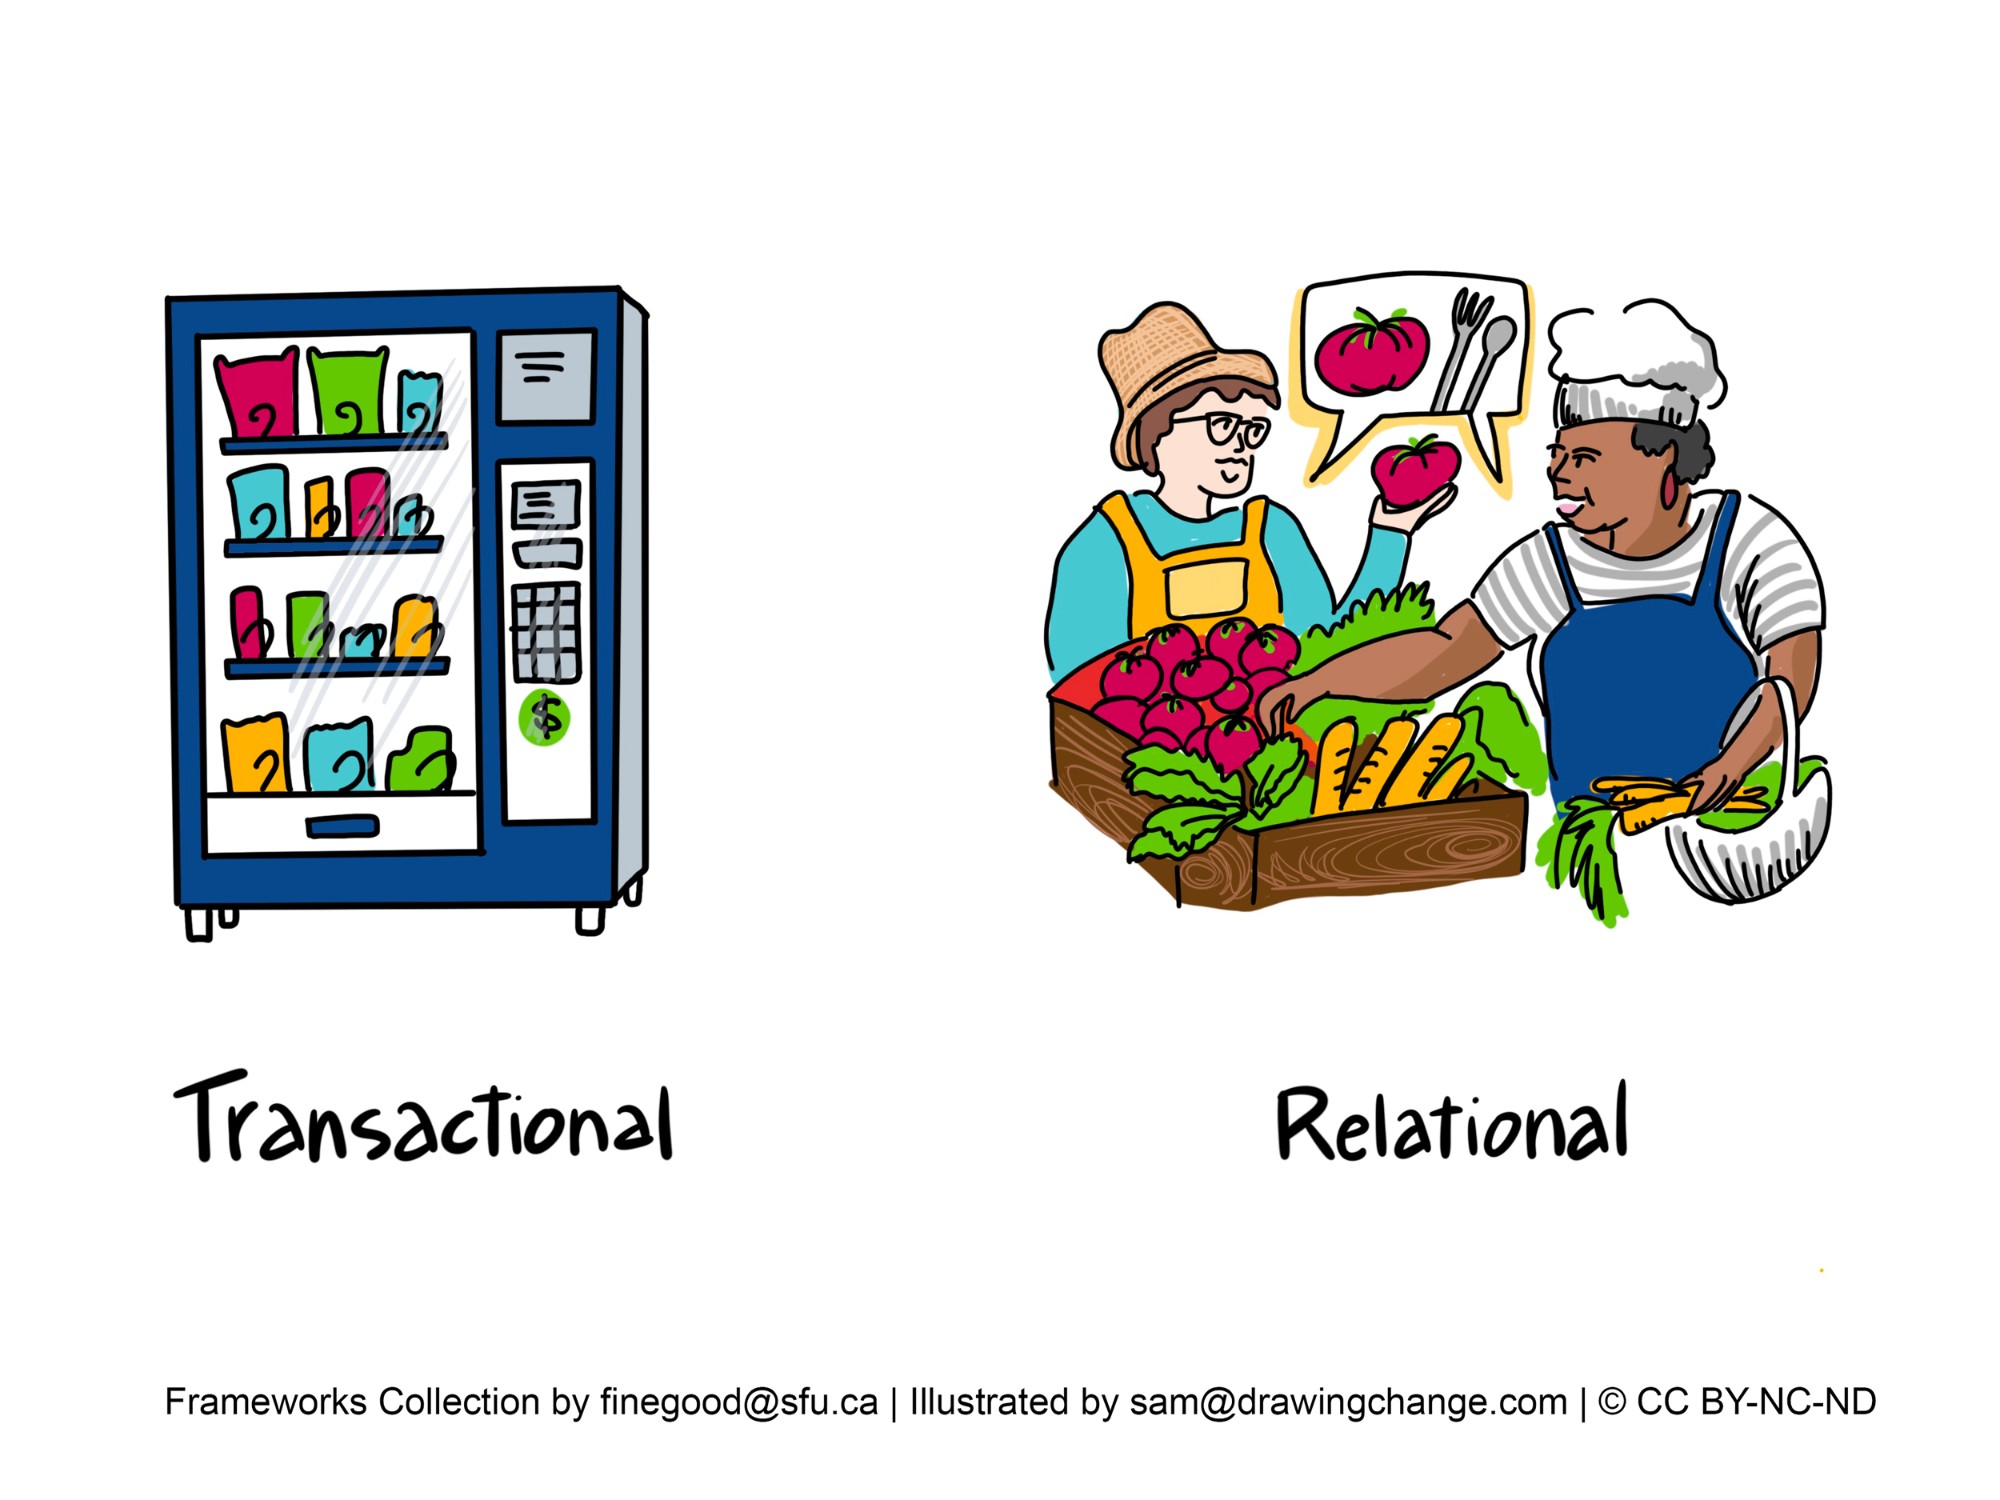 Transactional to Relational selling